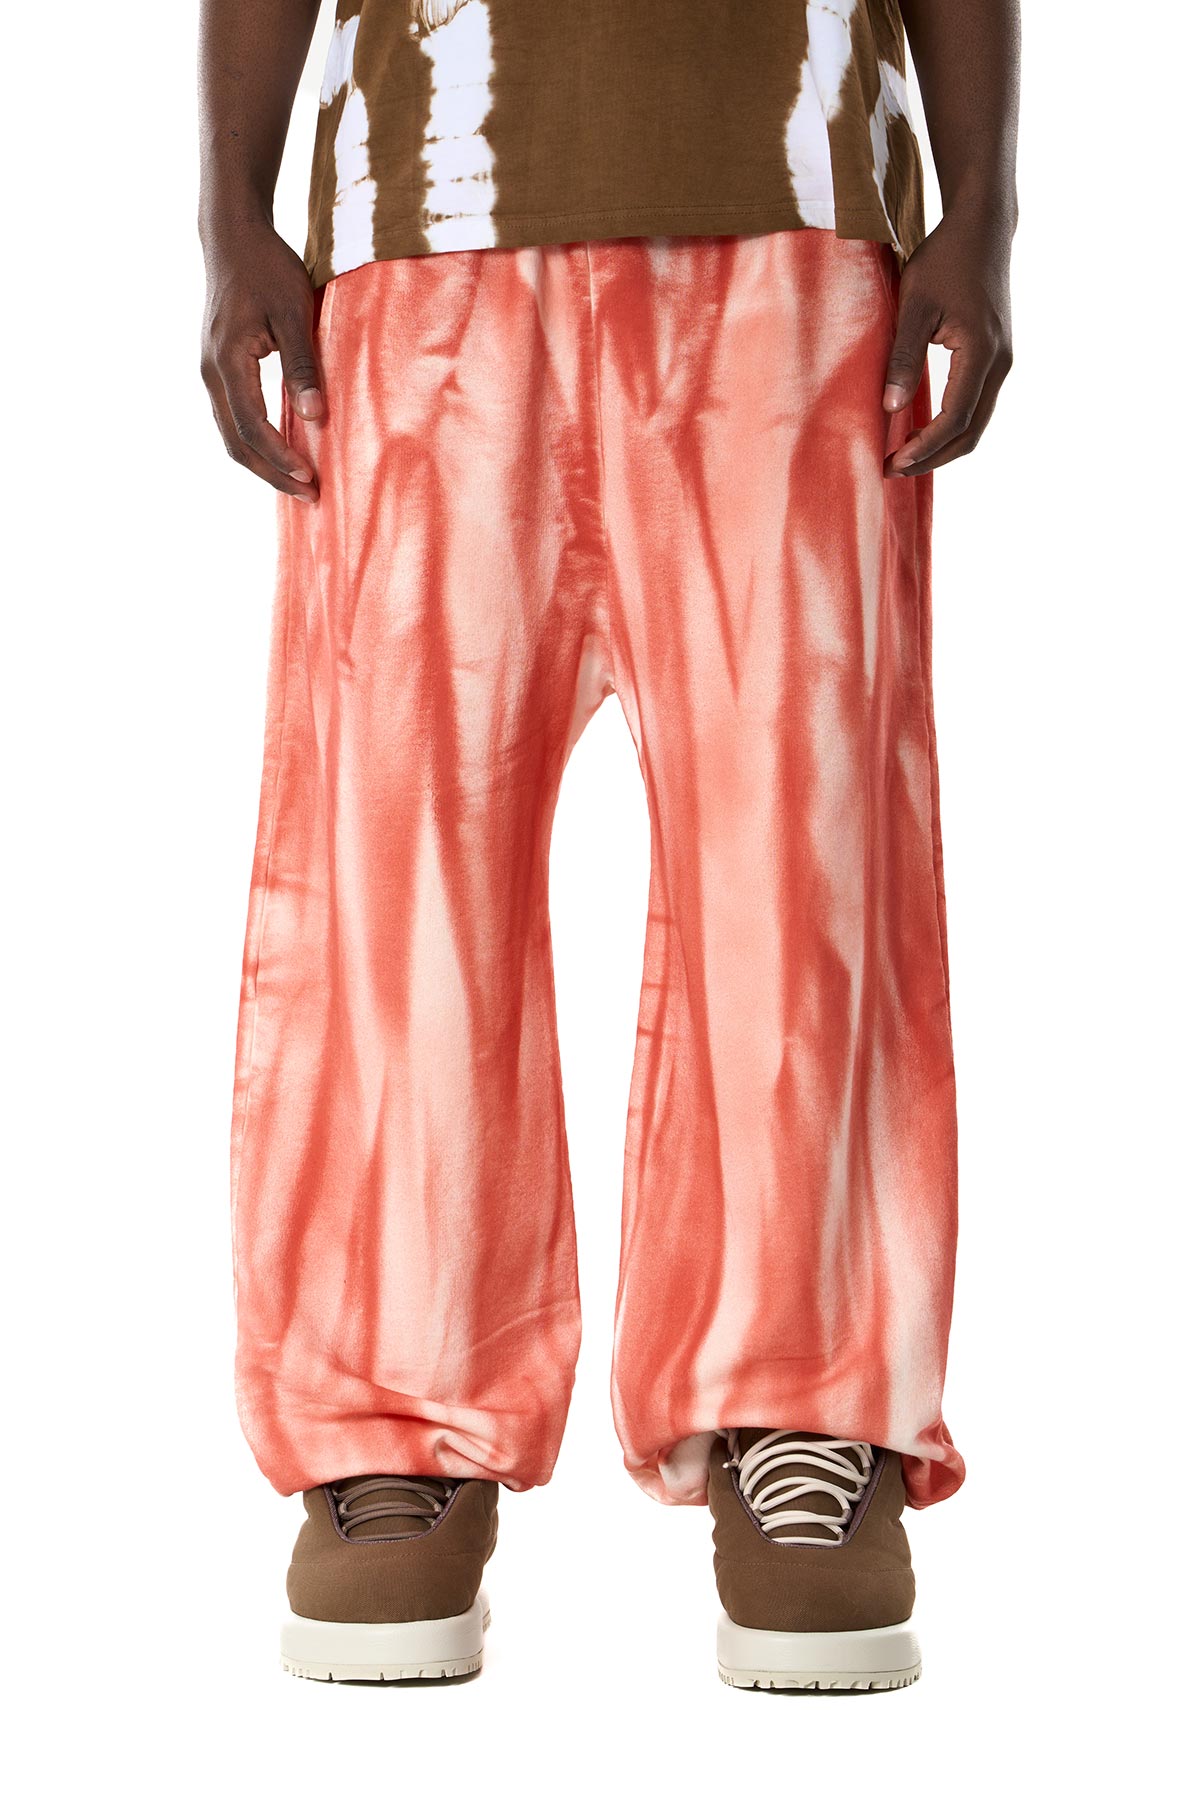 WILDCAT PANTS // RED - PDF CHANNEL